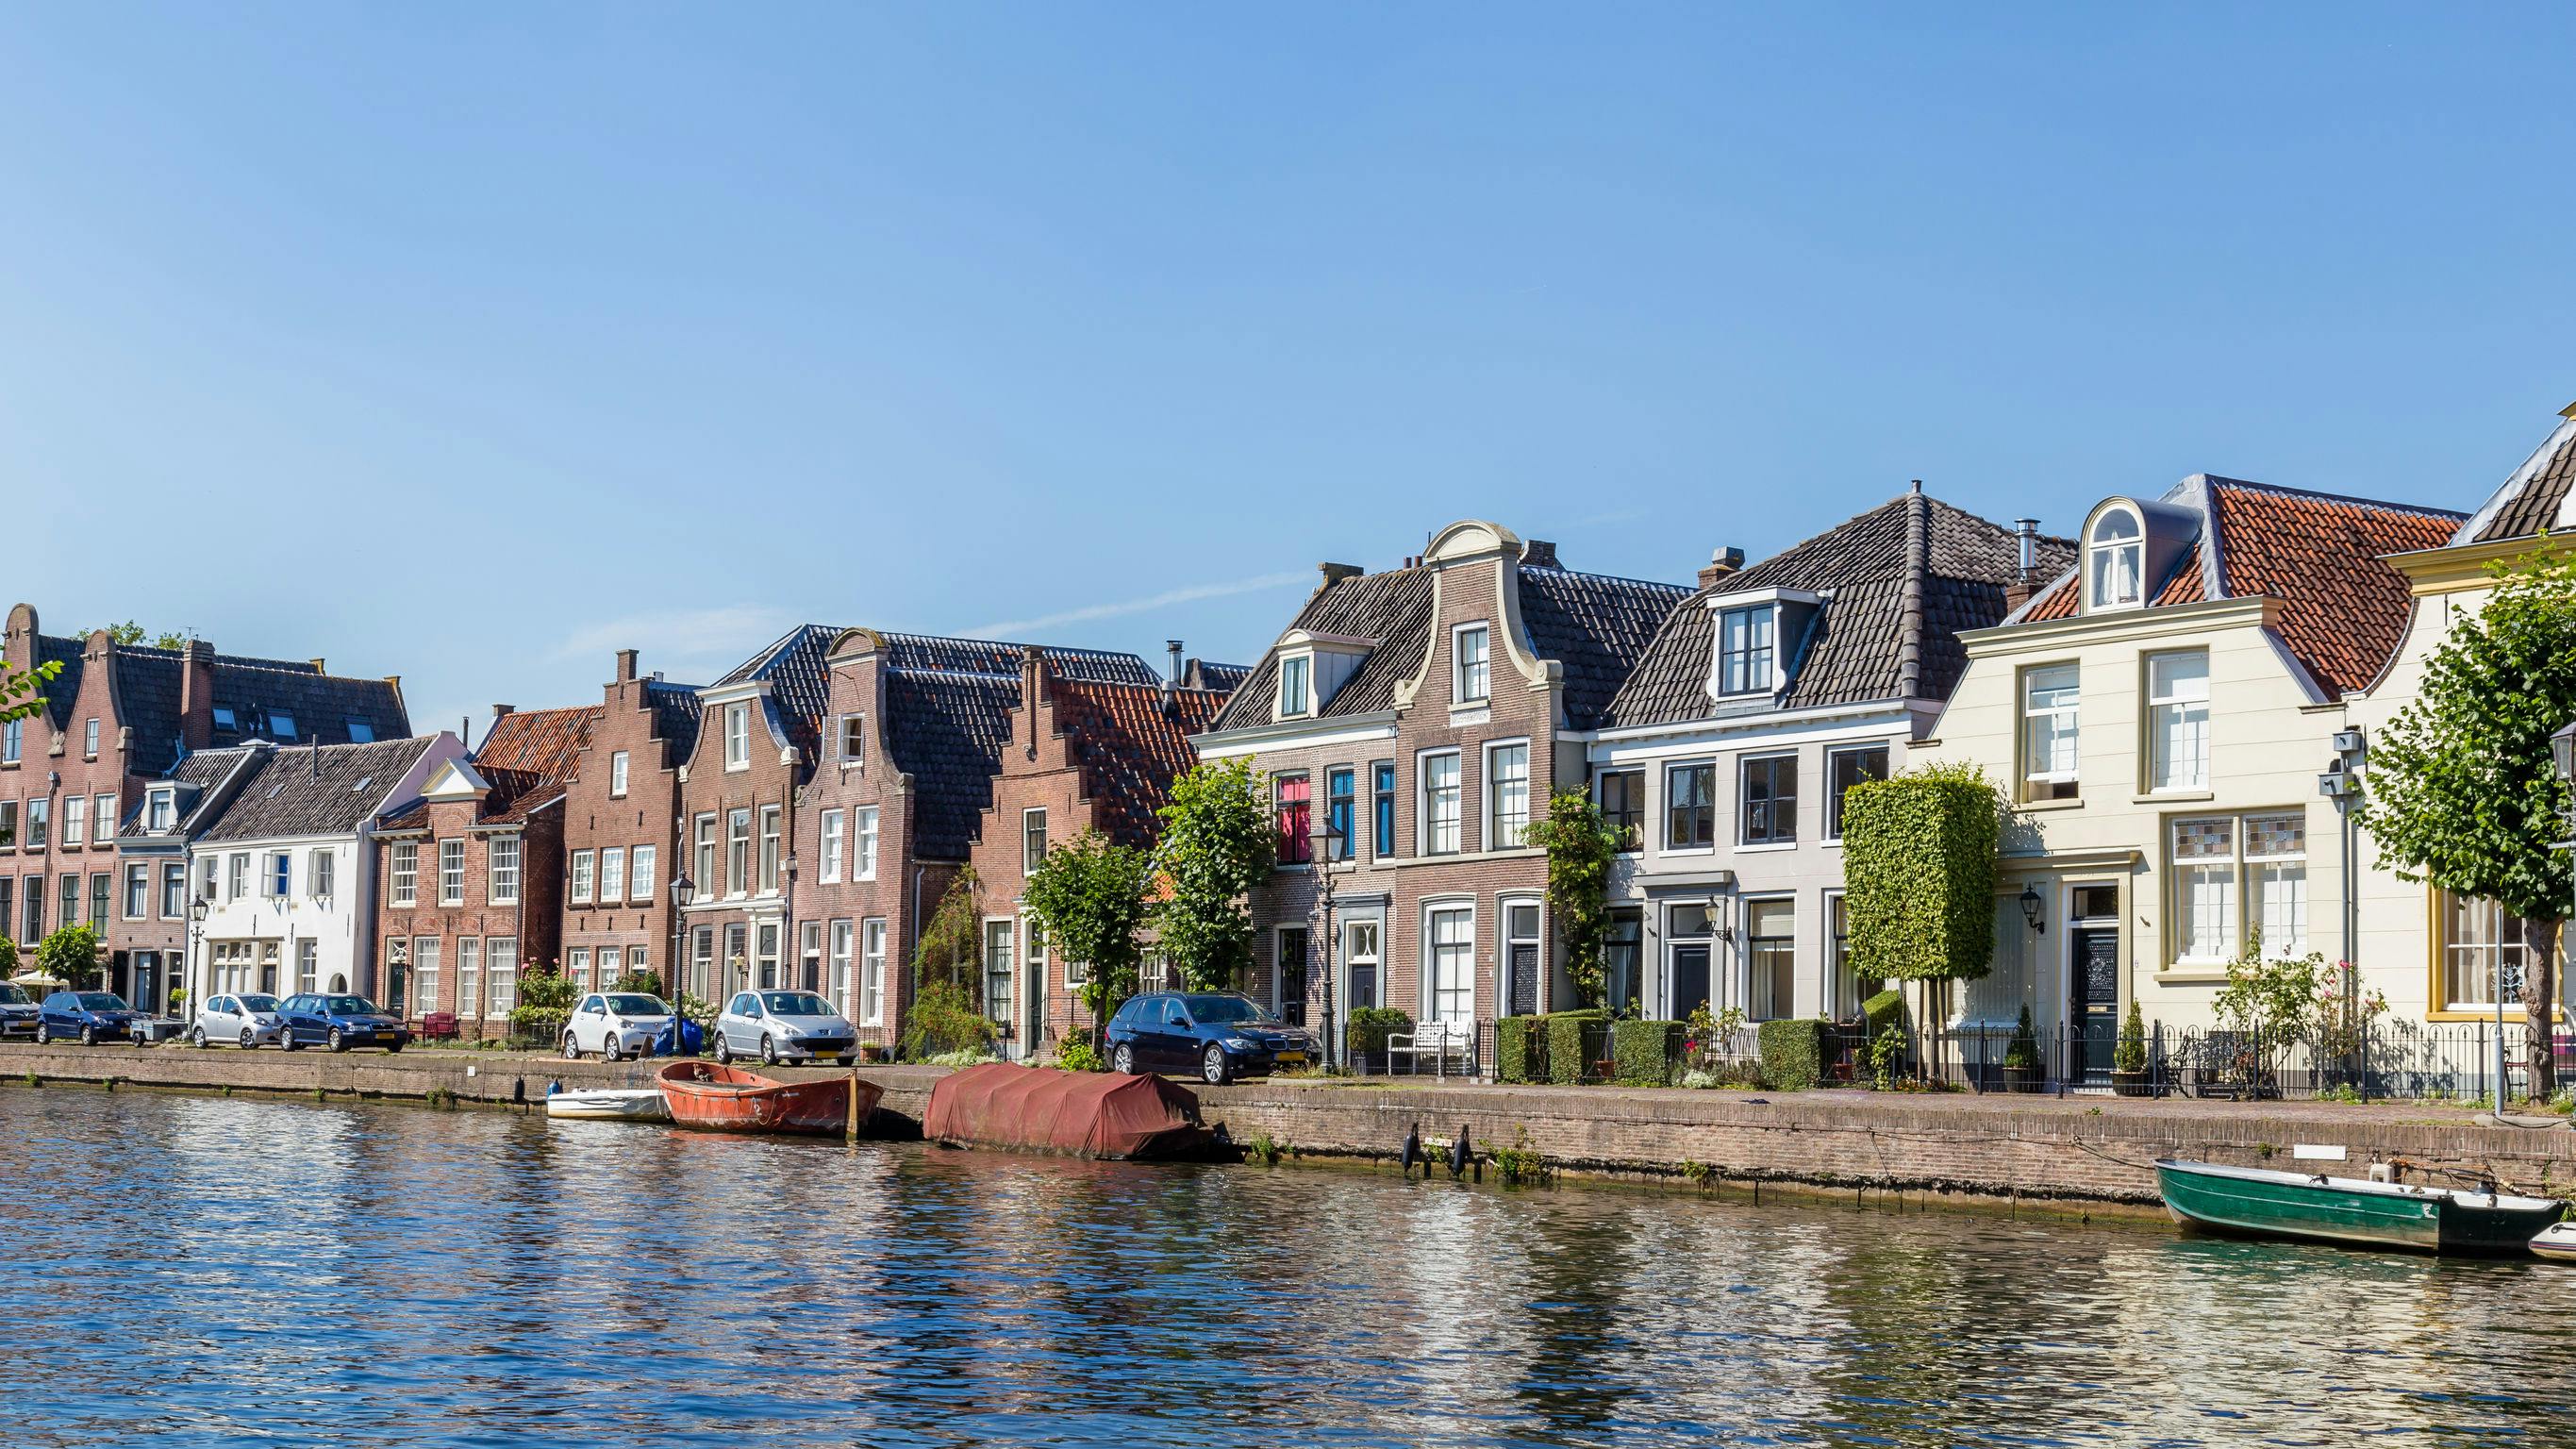 Private afternoon high tea cruise on Vecht River from Utrecht